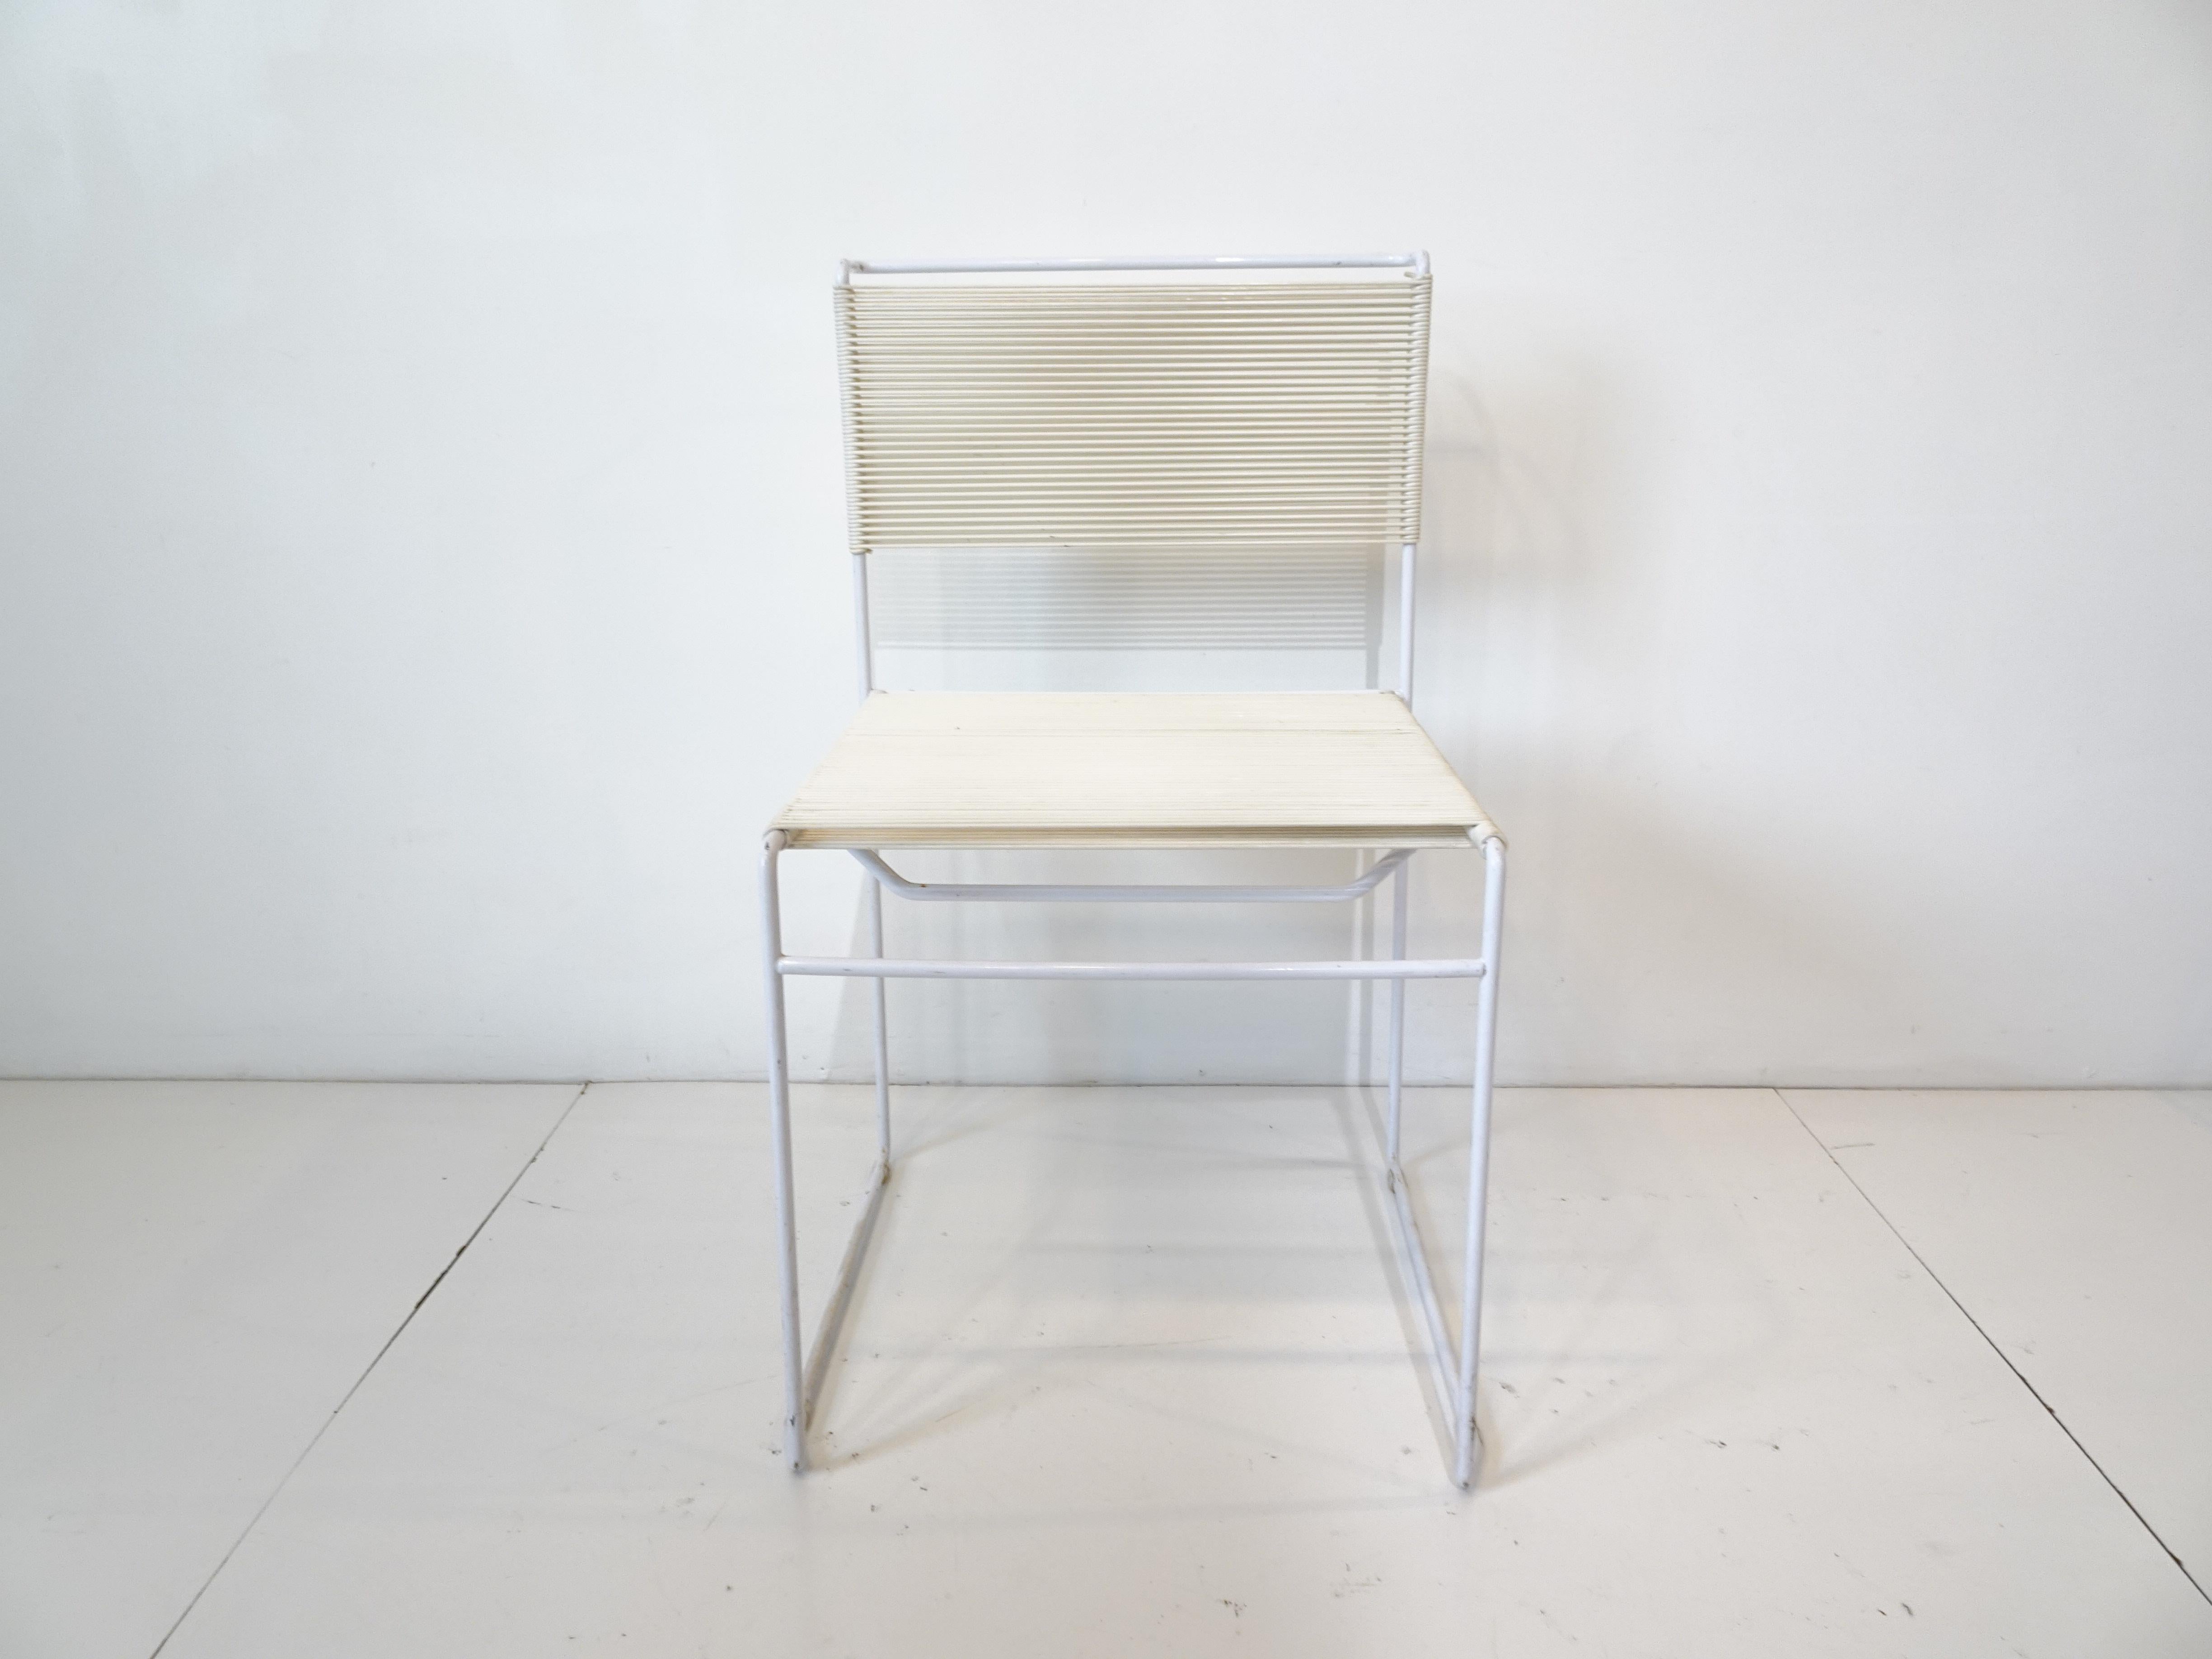 A set of four white PVC steel framed dining chairs with nylon rope woven seat and back called the Spaghetti chair designed by Giandomenico Belotti. Manufactured in Italy by Flyline / Alias having that Memphis styled look that is simple yet using